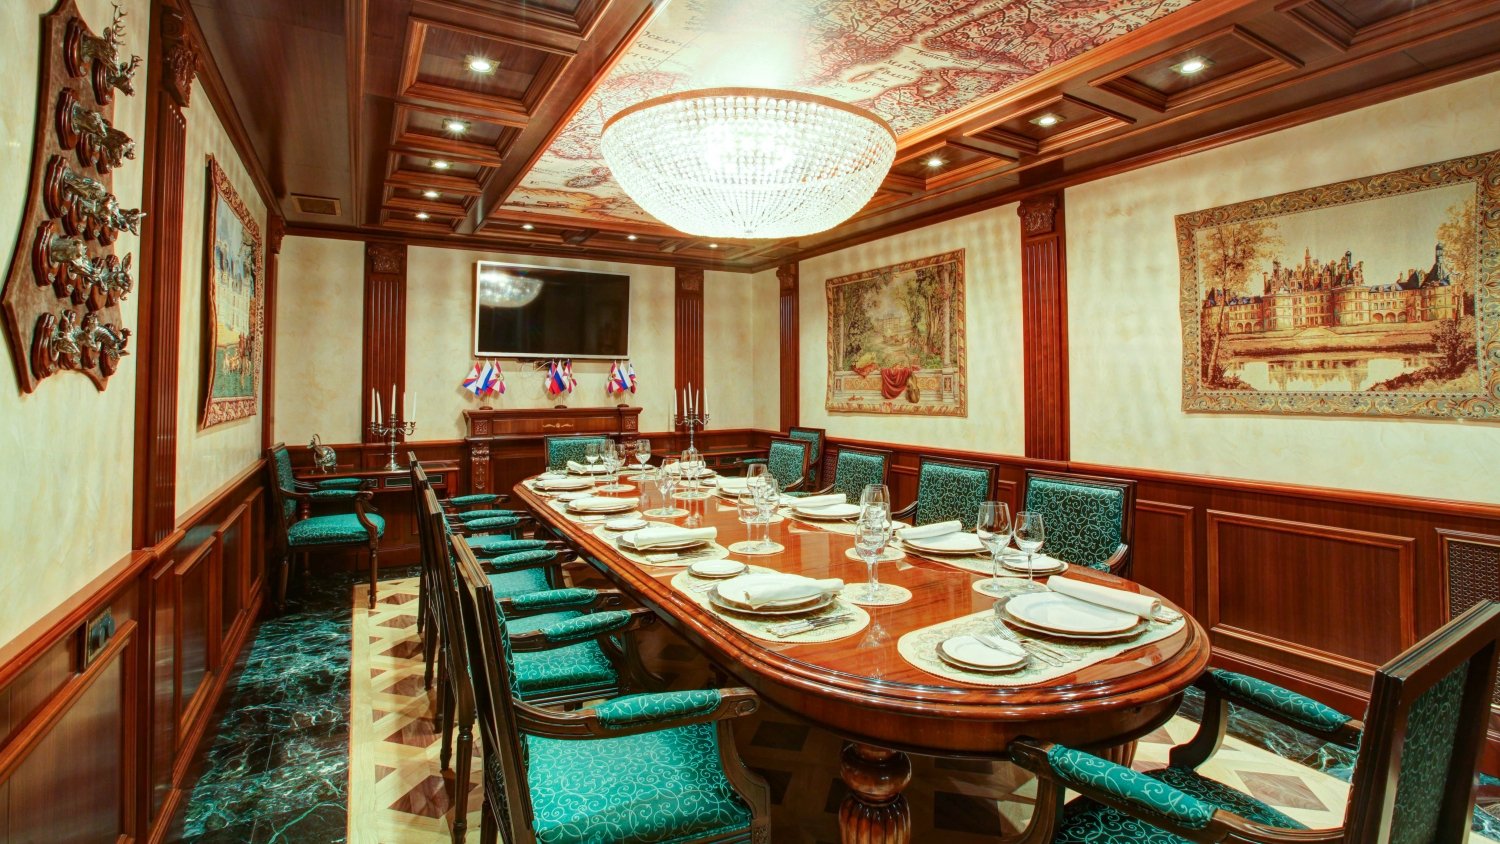 Russian Geographic Society restaurant